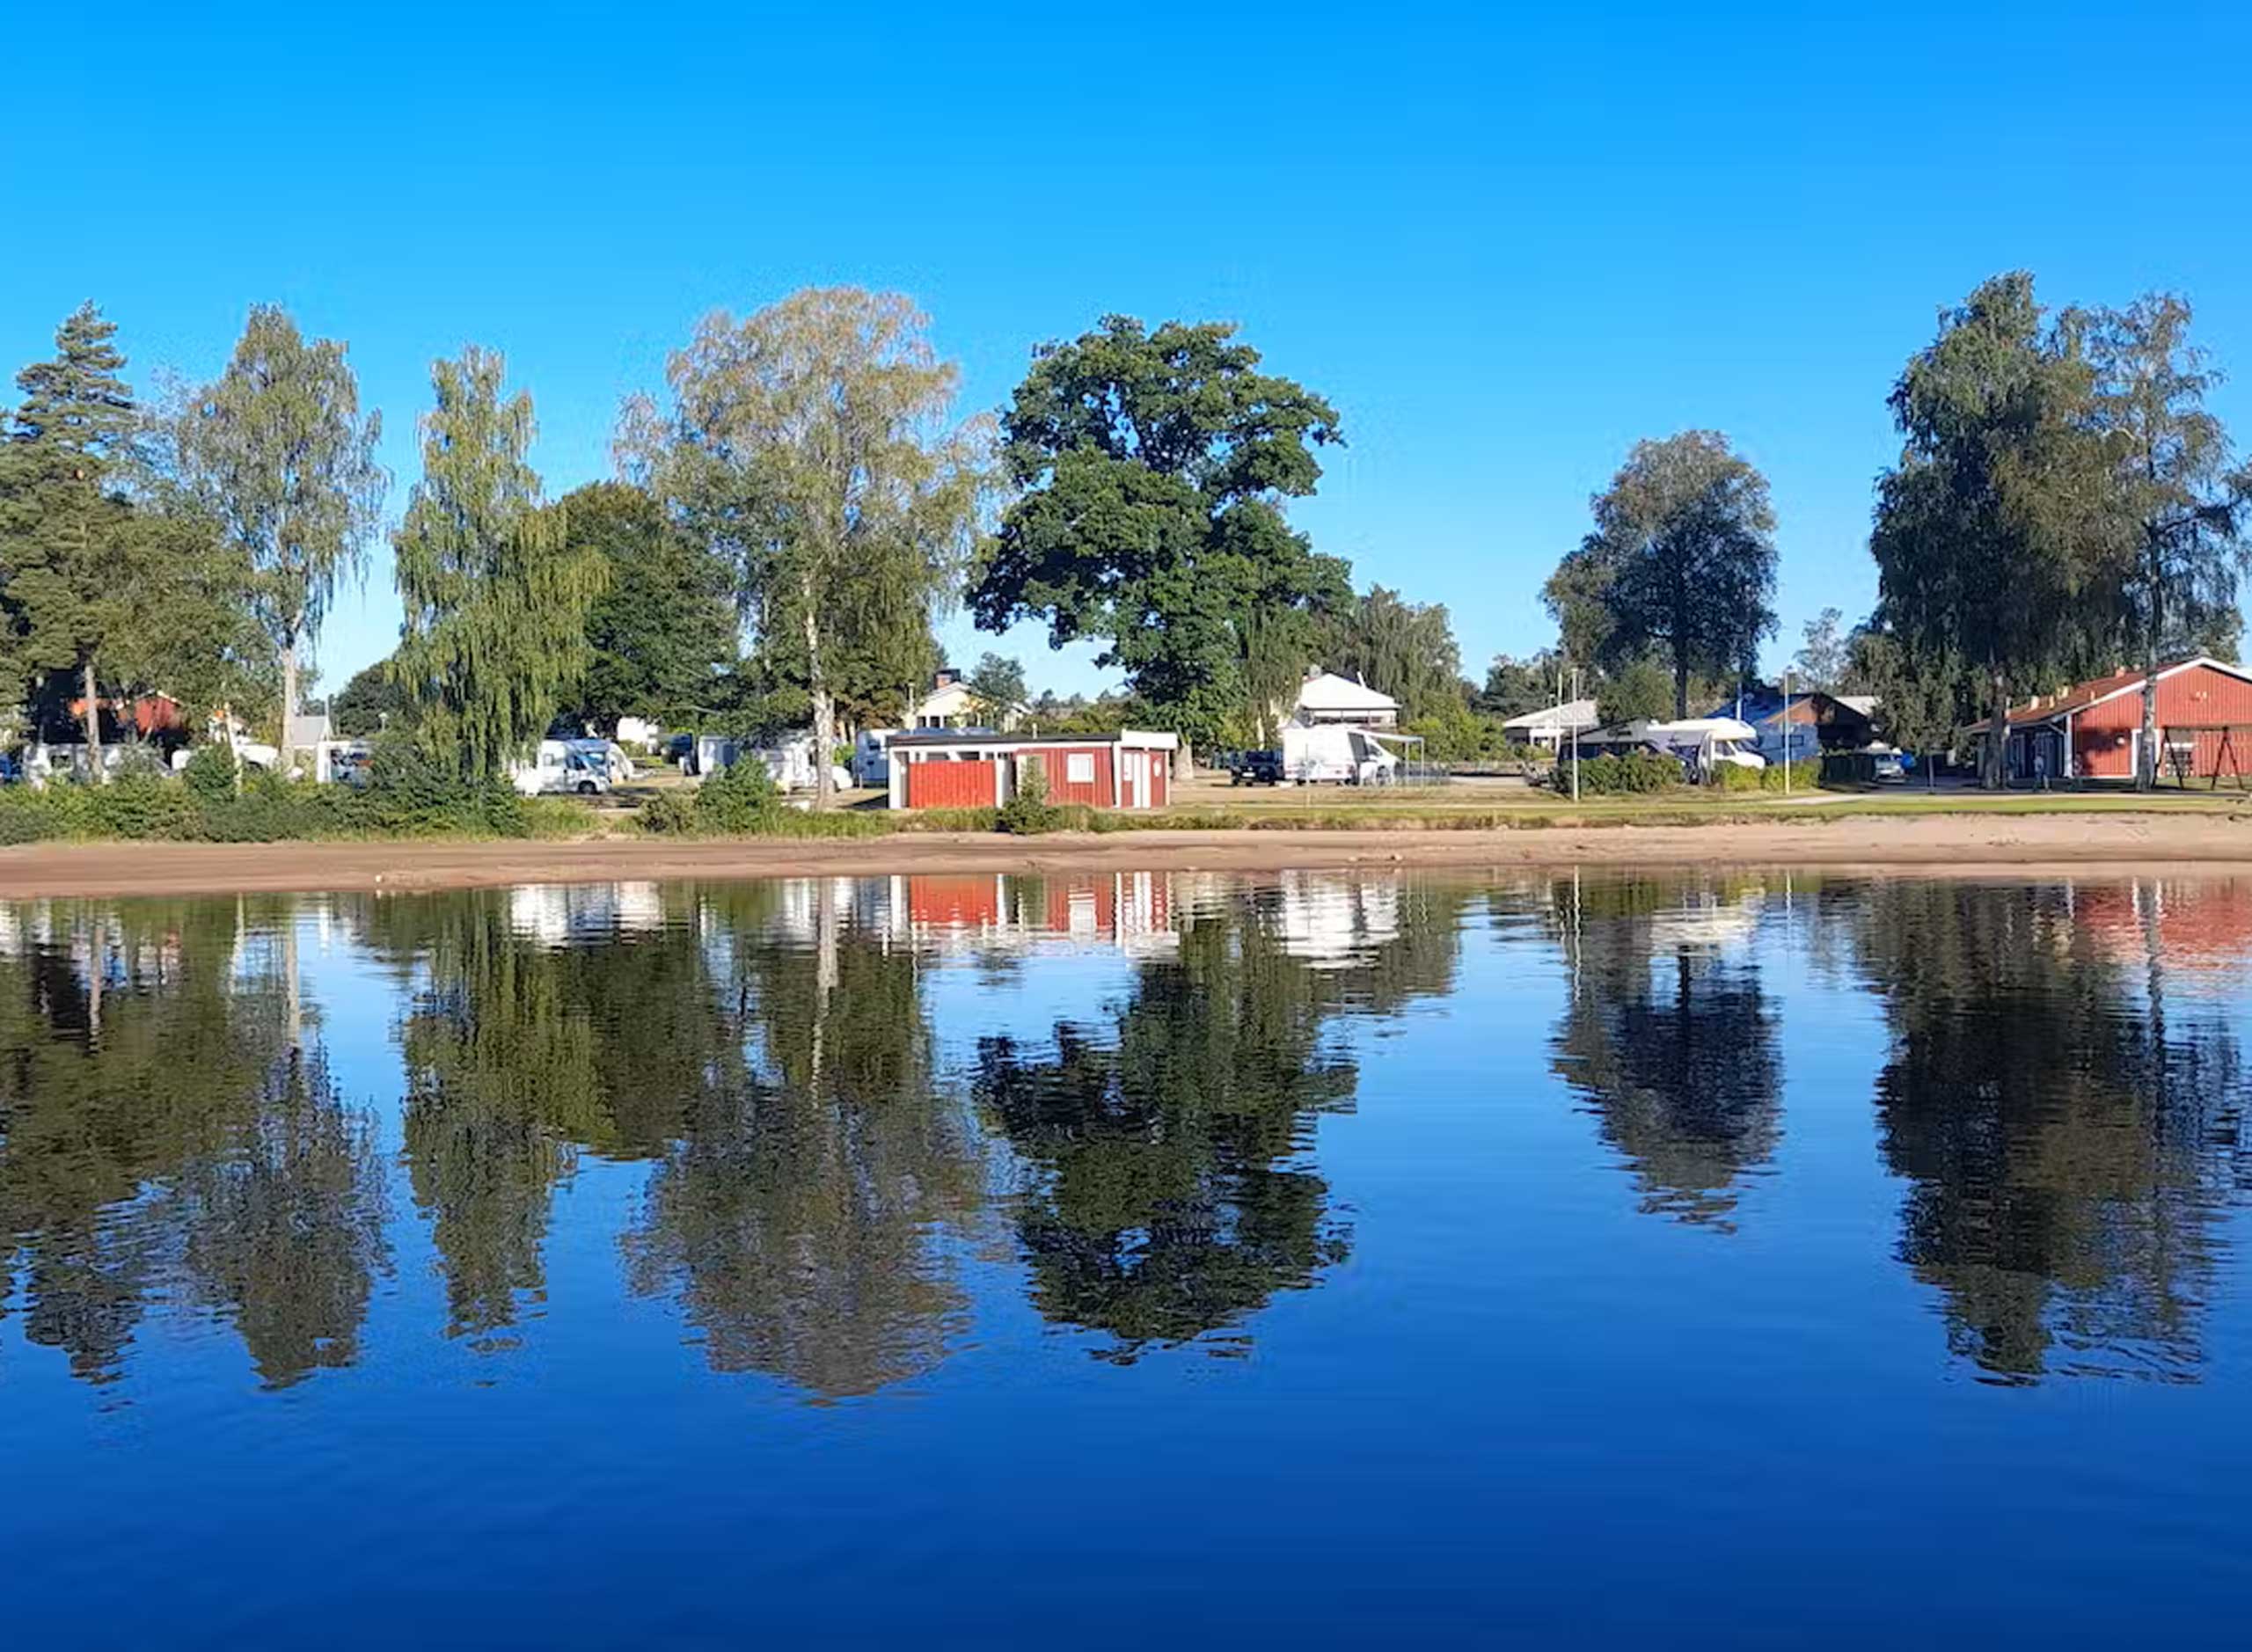 At Gökaskratts Camping, you can stay in a nice lakeside location. Copyright: Pincamp.de